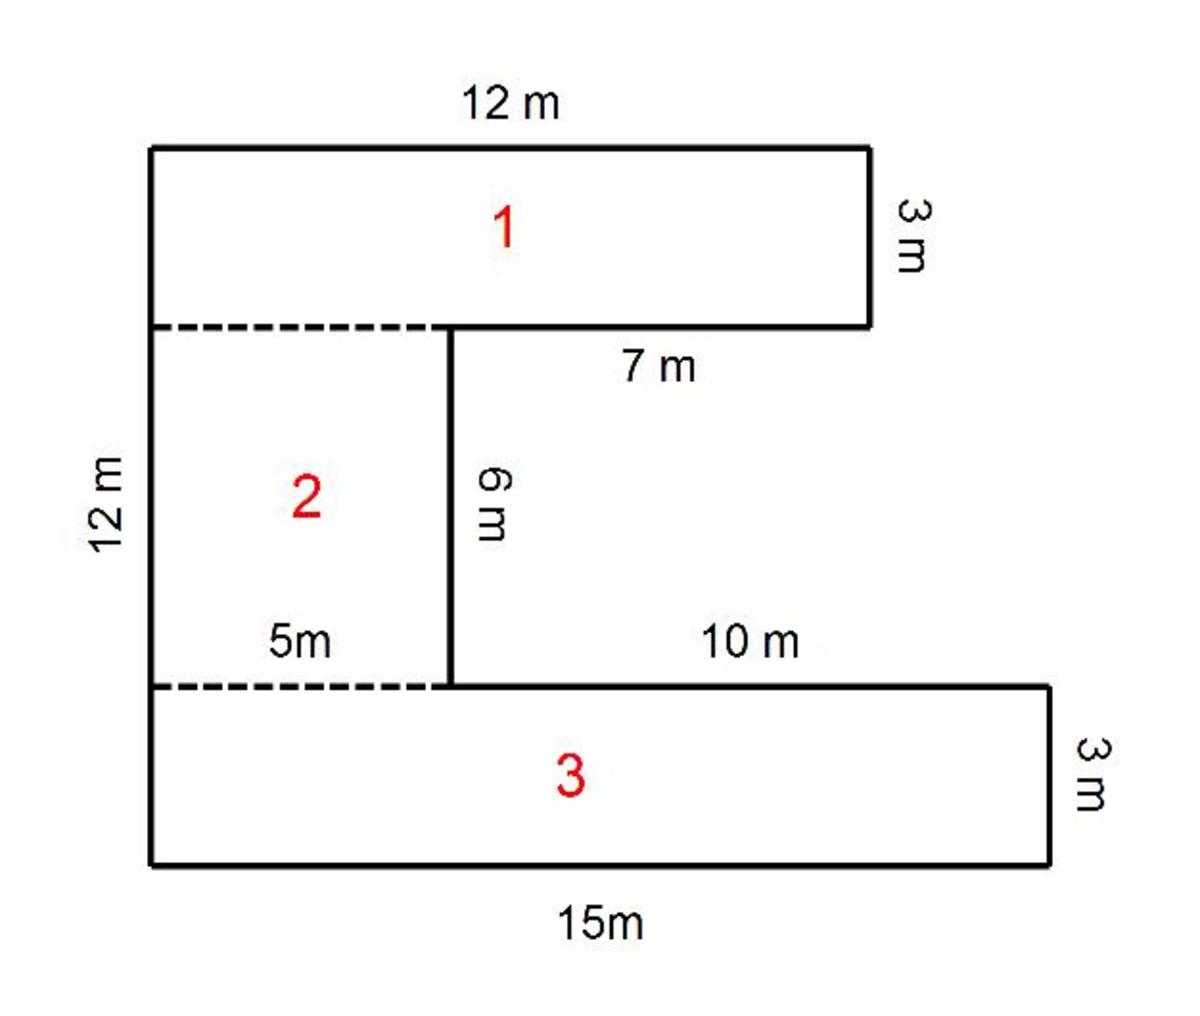 Compound C Shapes: How to Calculate the Perimeter and Area of a C